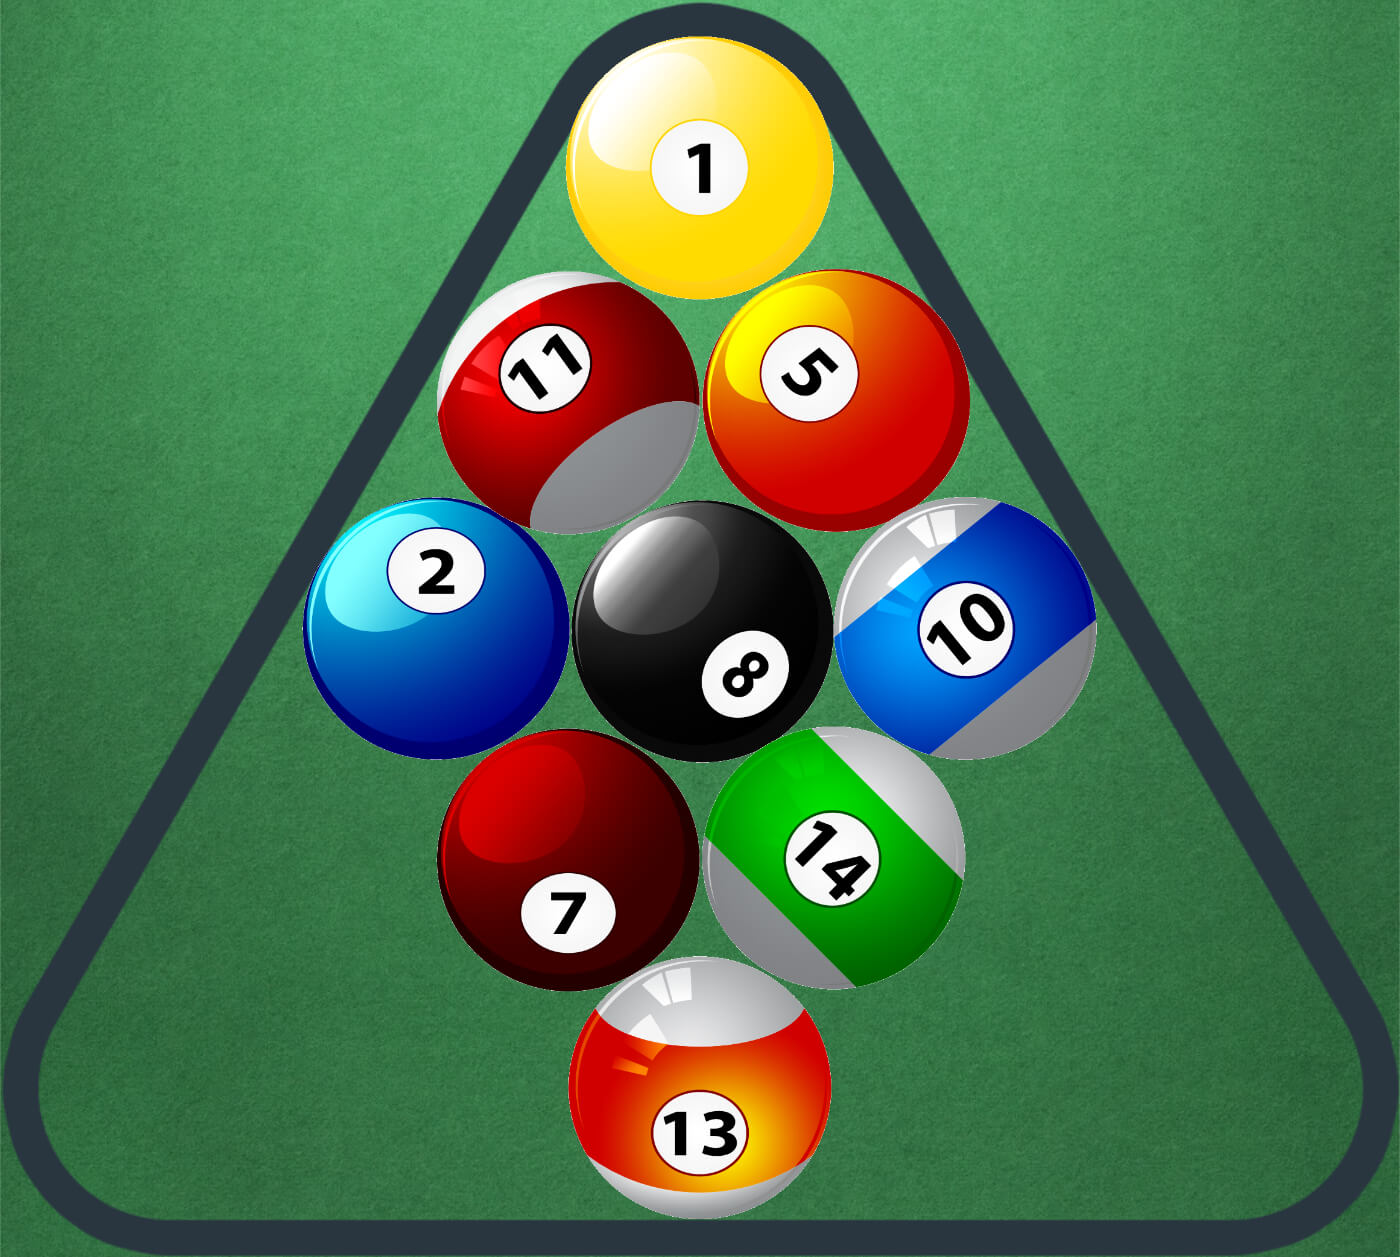 https://www.libertygames.co.uk/images/faqs/extended/77/9-ball-with-triangle@2x.jpg